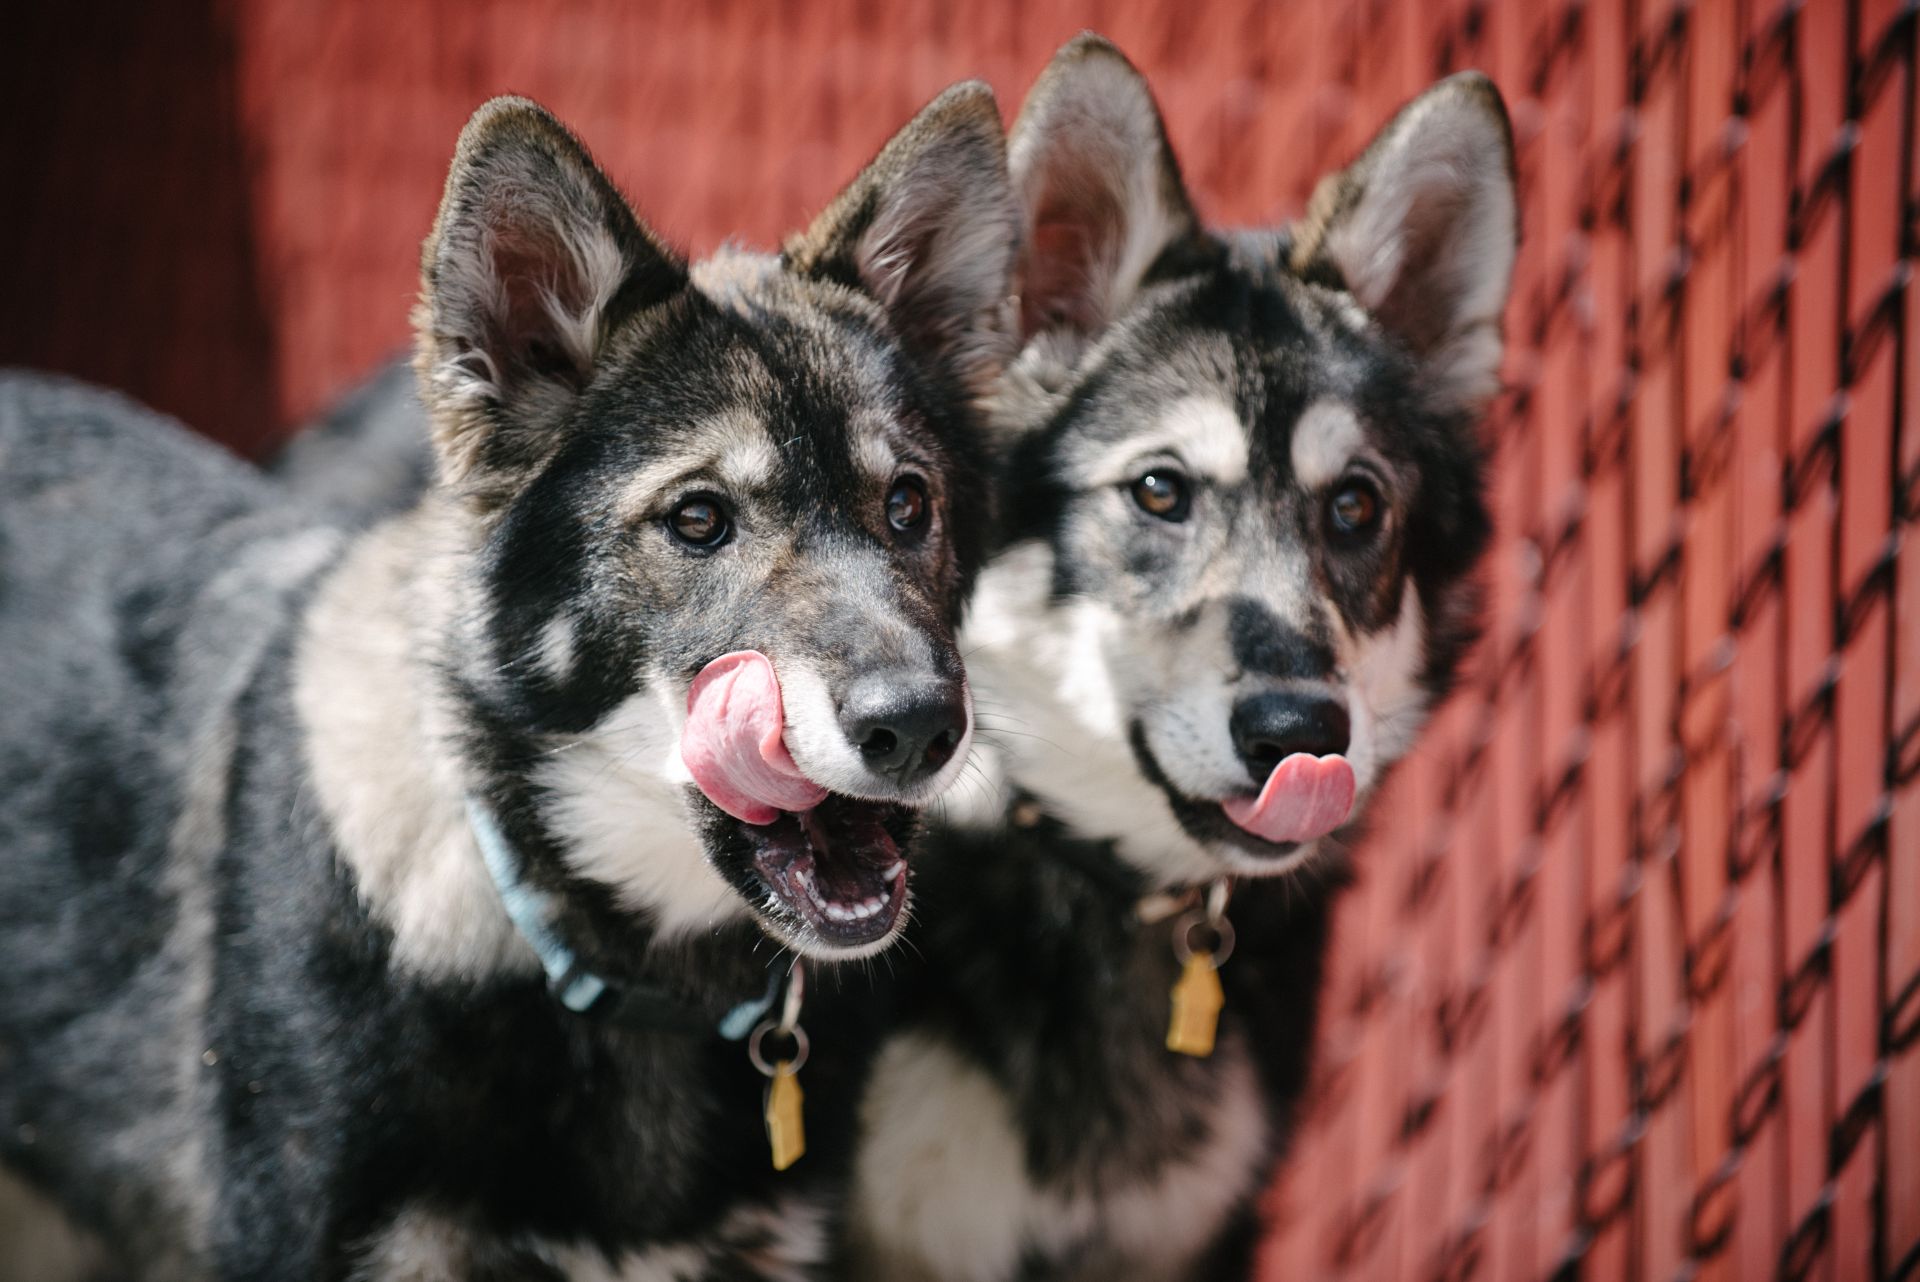 Grey, white and black husky puppies looking at the camera and licking their lips for a tasty treat